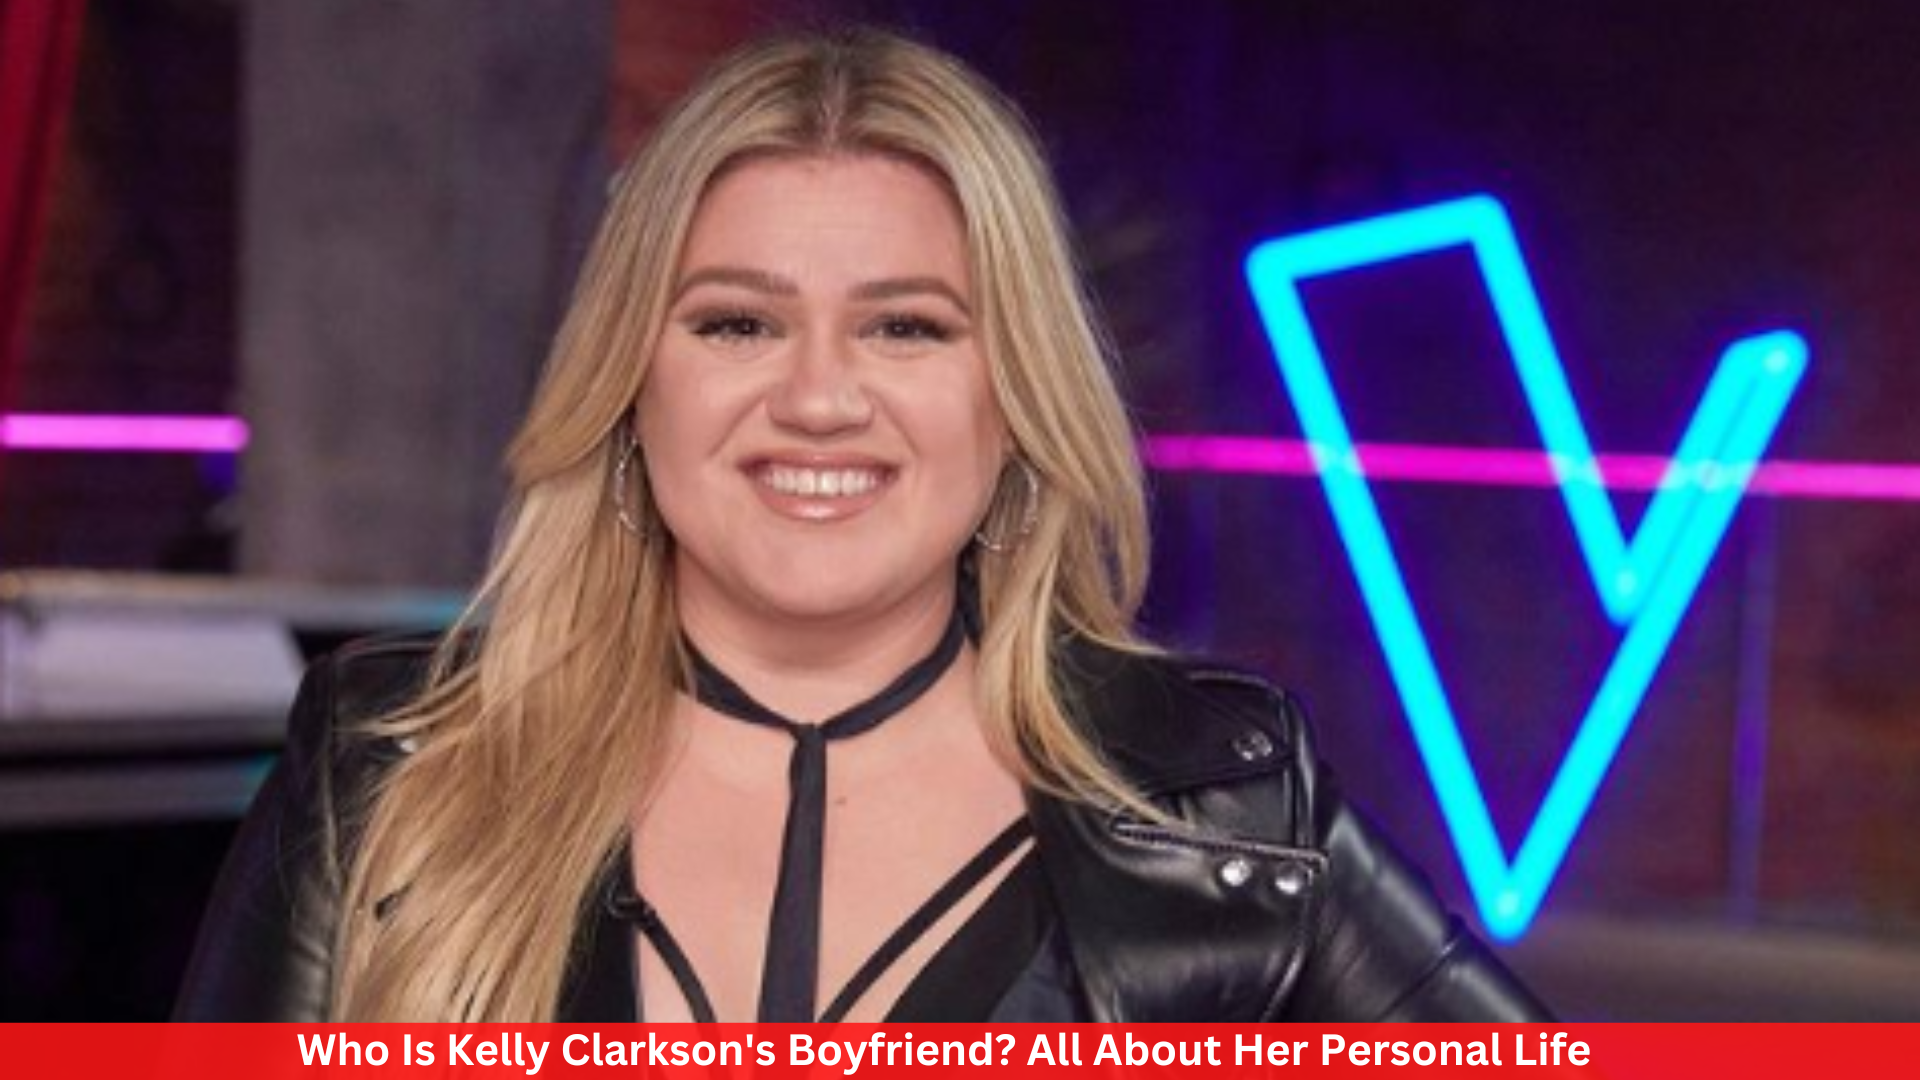 Who Is Kelly Clarkson's Boyfriend? All About Her Personal Life